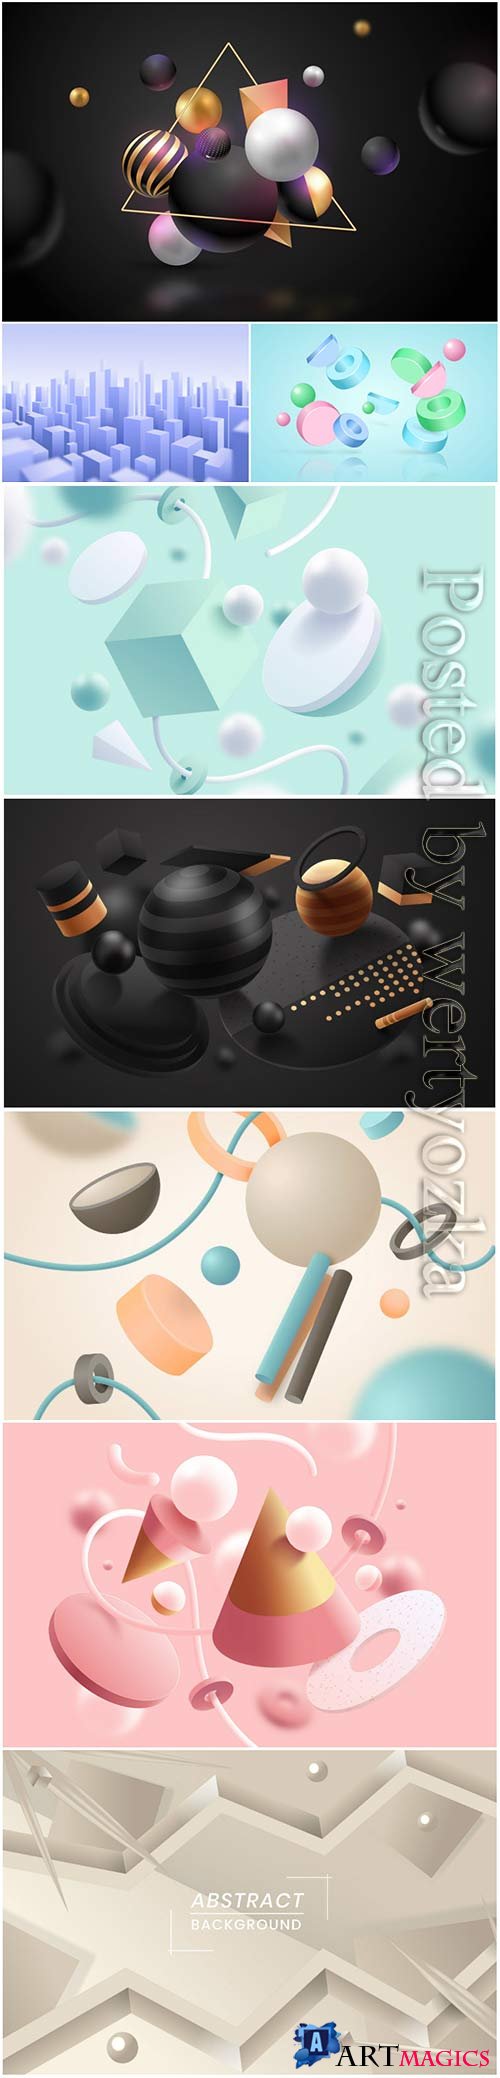 Abstract vector background, 3d models template # 5